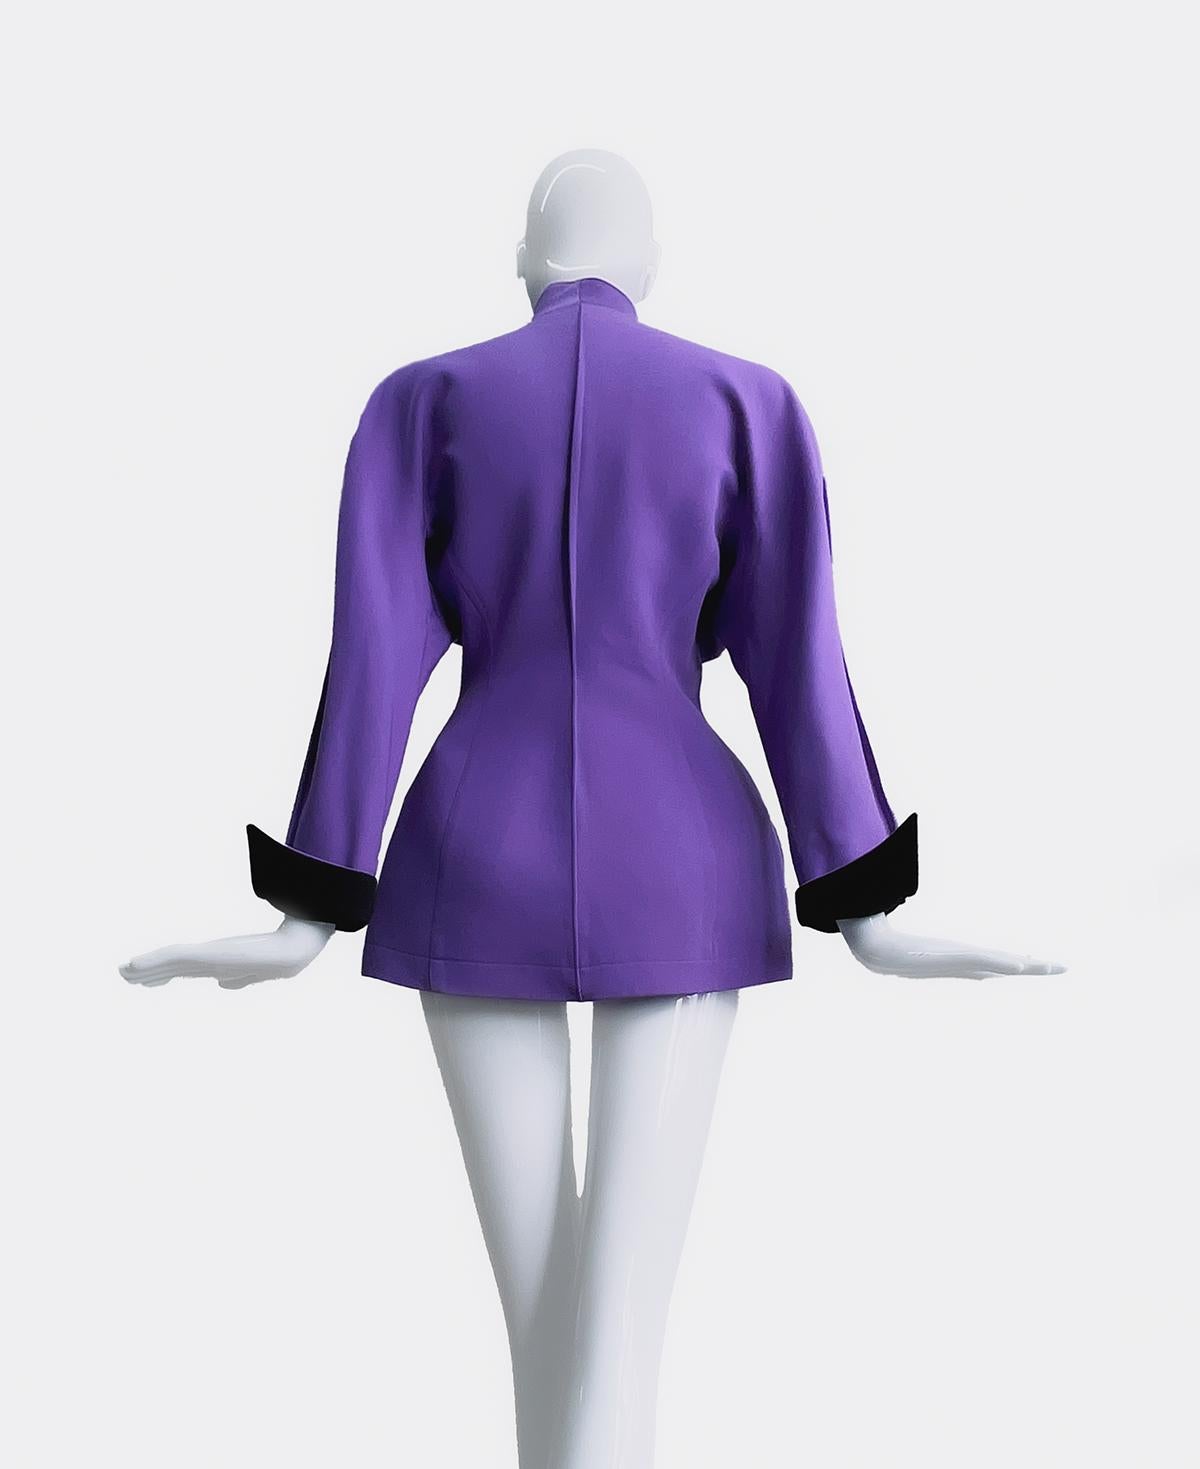 Thierry Mugler FW1989 Archival Sculptural Jacket  Dramatic Iman Purple / Violet  For Sale 3